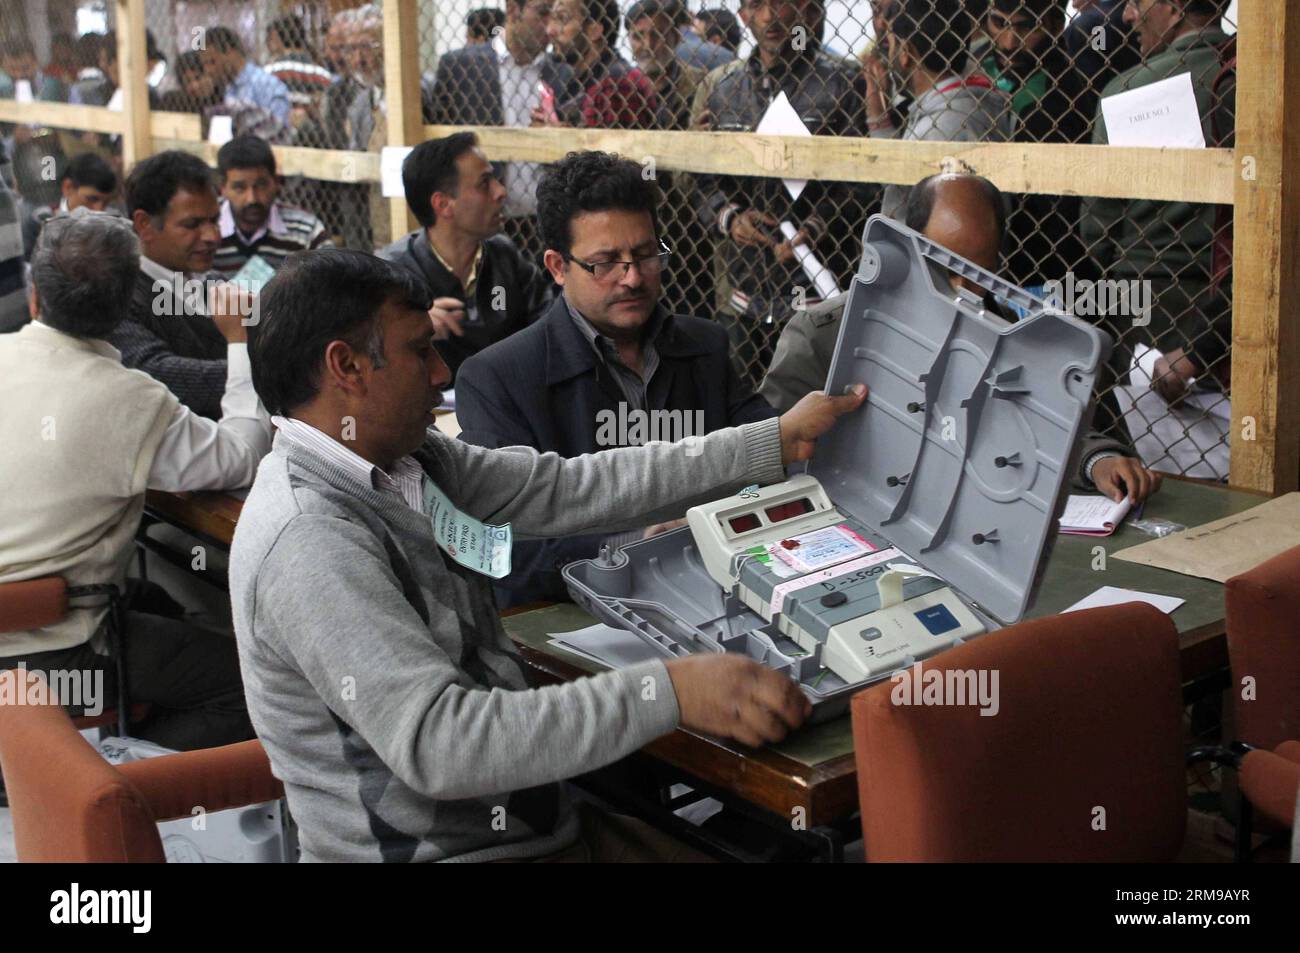 (140516) -- SRINAGAR, May 16, 2014 (Xinhua) -- An Indian election official opens an electronic voting machine during counting of votes at a counting station in Srinagar, summer capital of Indian-controlled Kashmir, May 16, 2014. Indian election officials began counting votes following the country s massive parliamentary election on Friday morning. The Election Commission was expected to announce the results later in the day. (Xinhua/Javed Dar) KASHMIR-SRINAGAR-INDIAN GENERAL ELECTIONS PUBLICATIONxNOTxINxCHN   Srinagar May 16 2014 XINHUA to Indian ELECTION Official Opens to Electronic Voting Ma Stock Photo